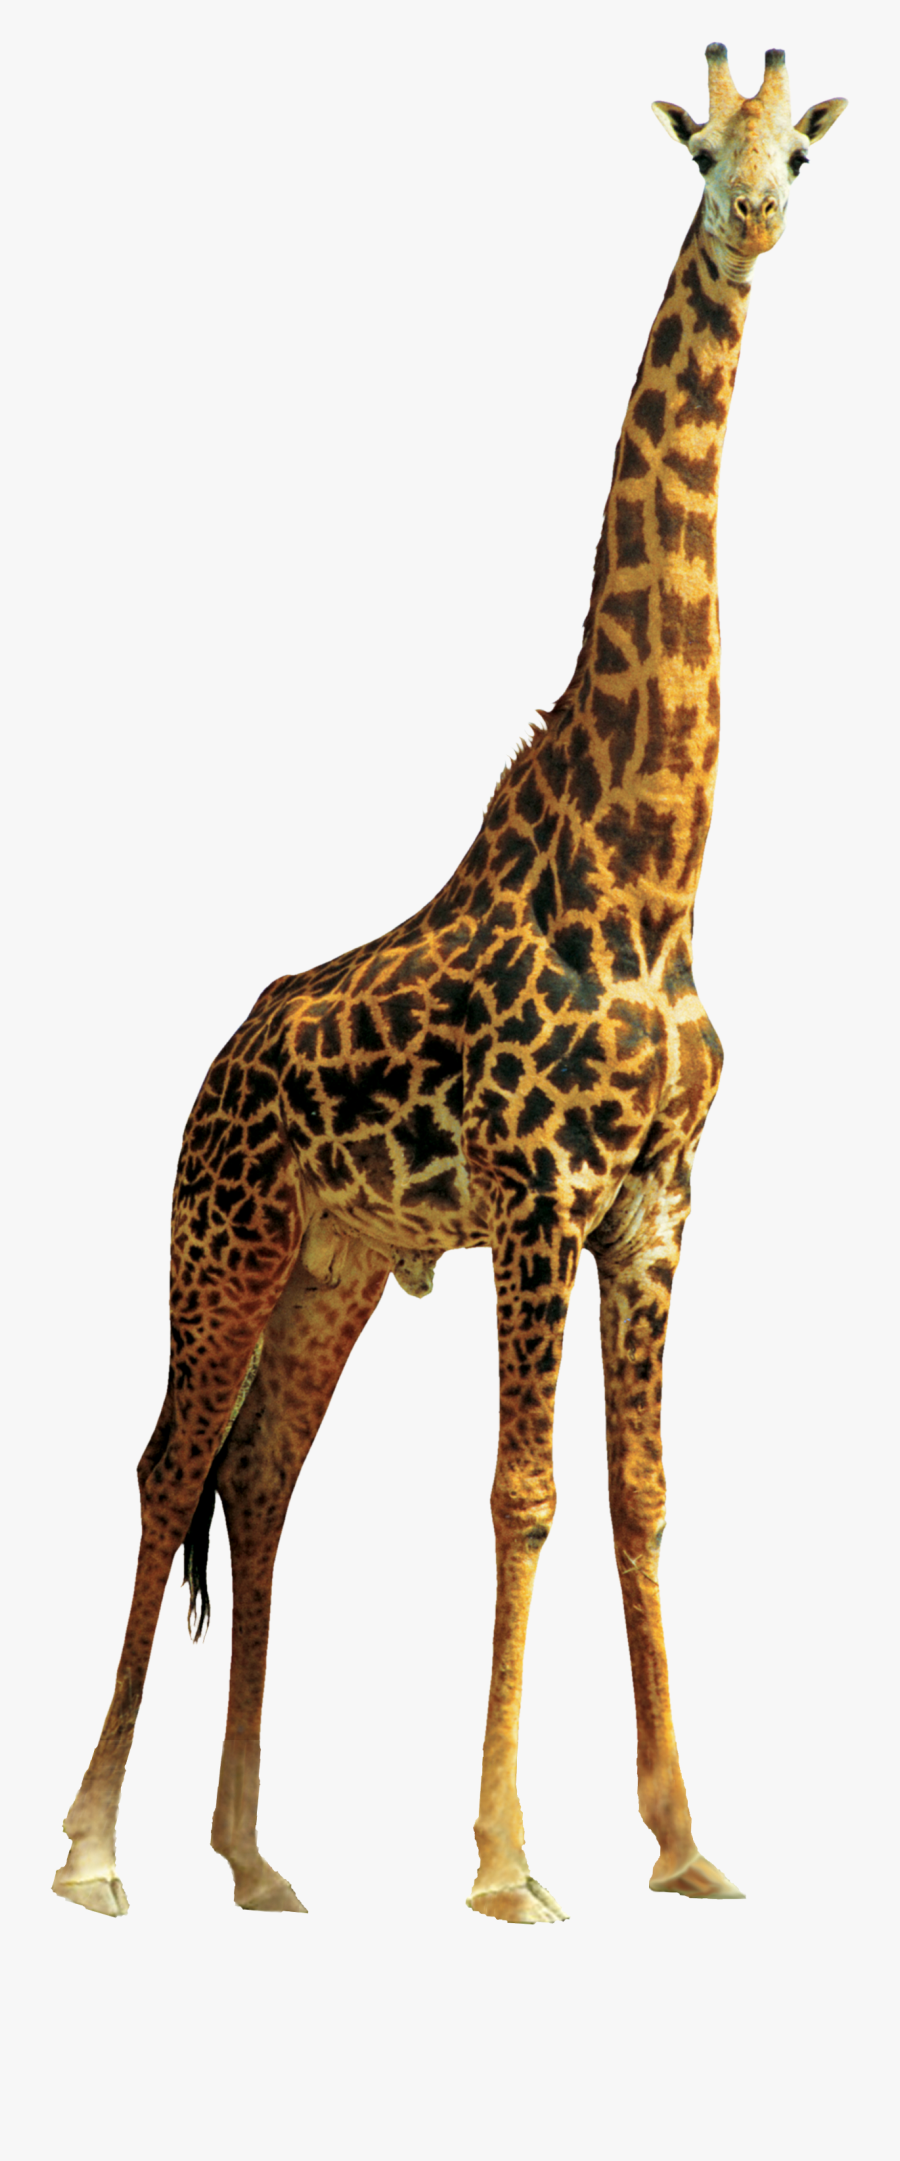 Northern Giraffe Transparency And Translucency Animal - Giraffe Png, Transparent Clipart